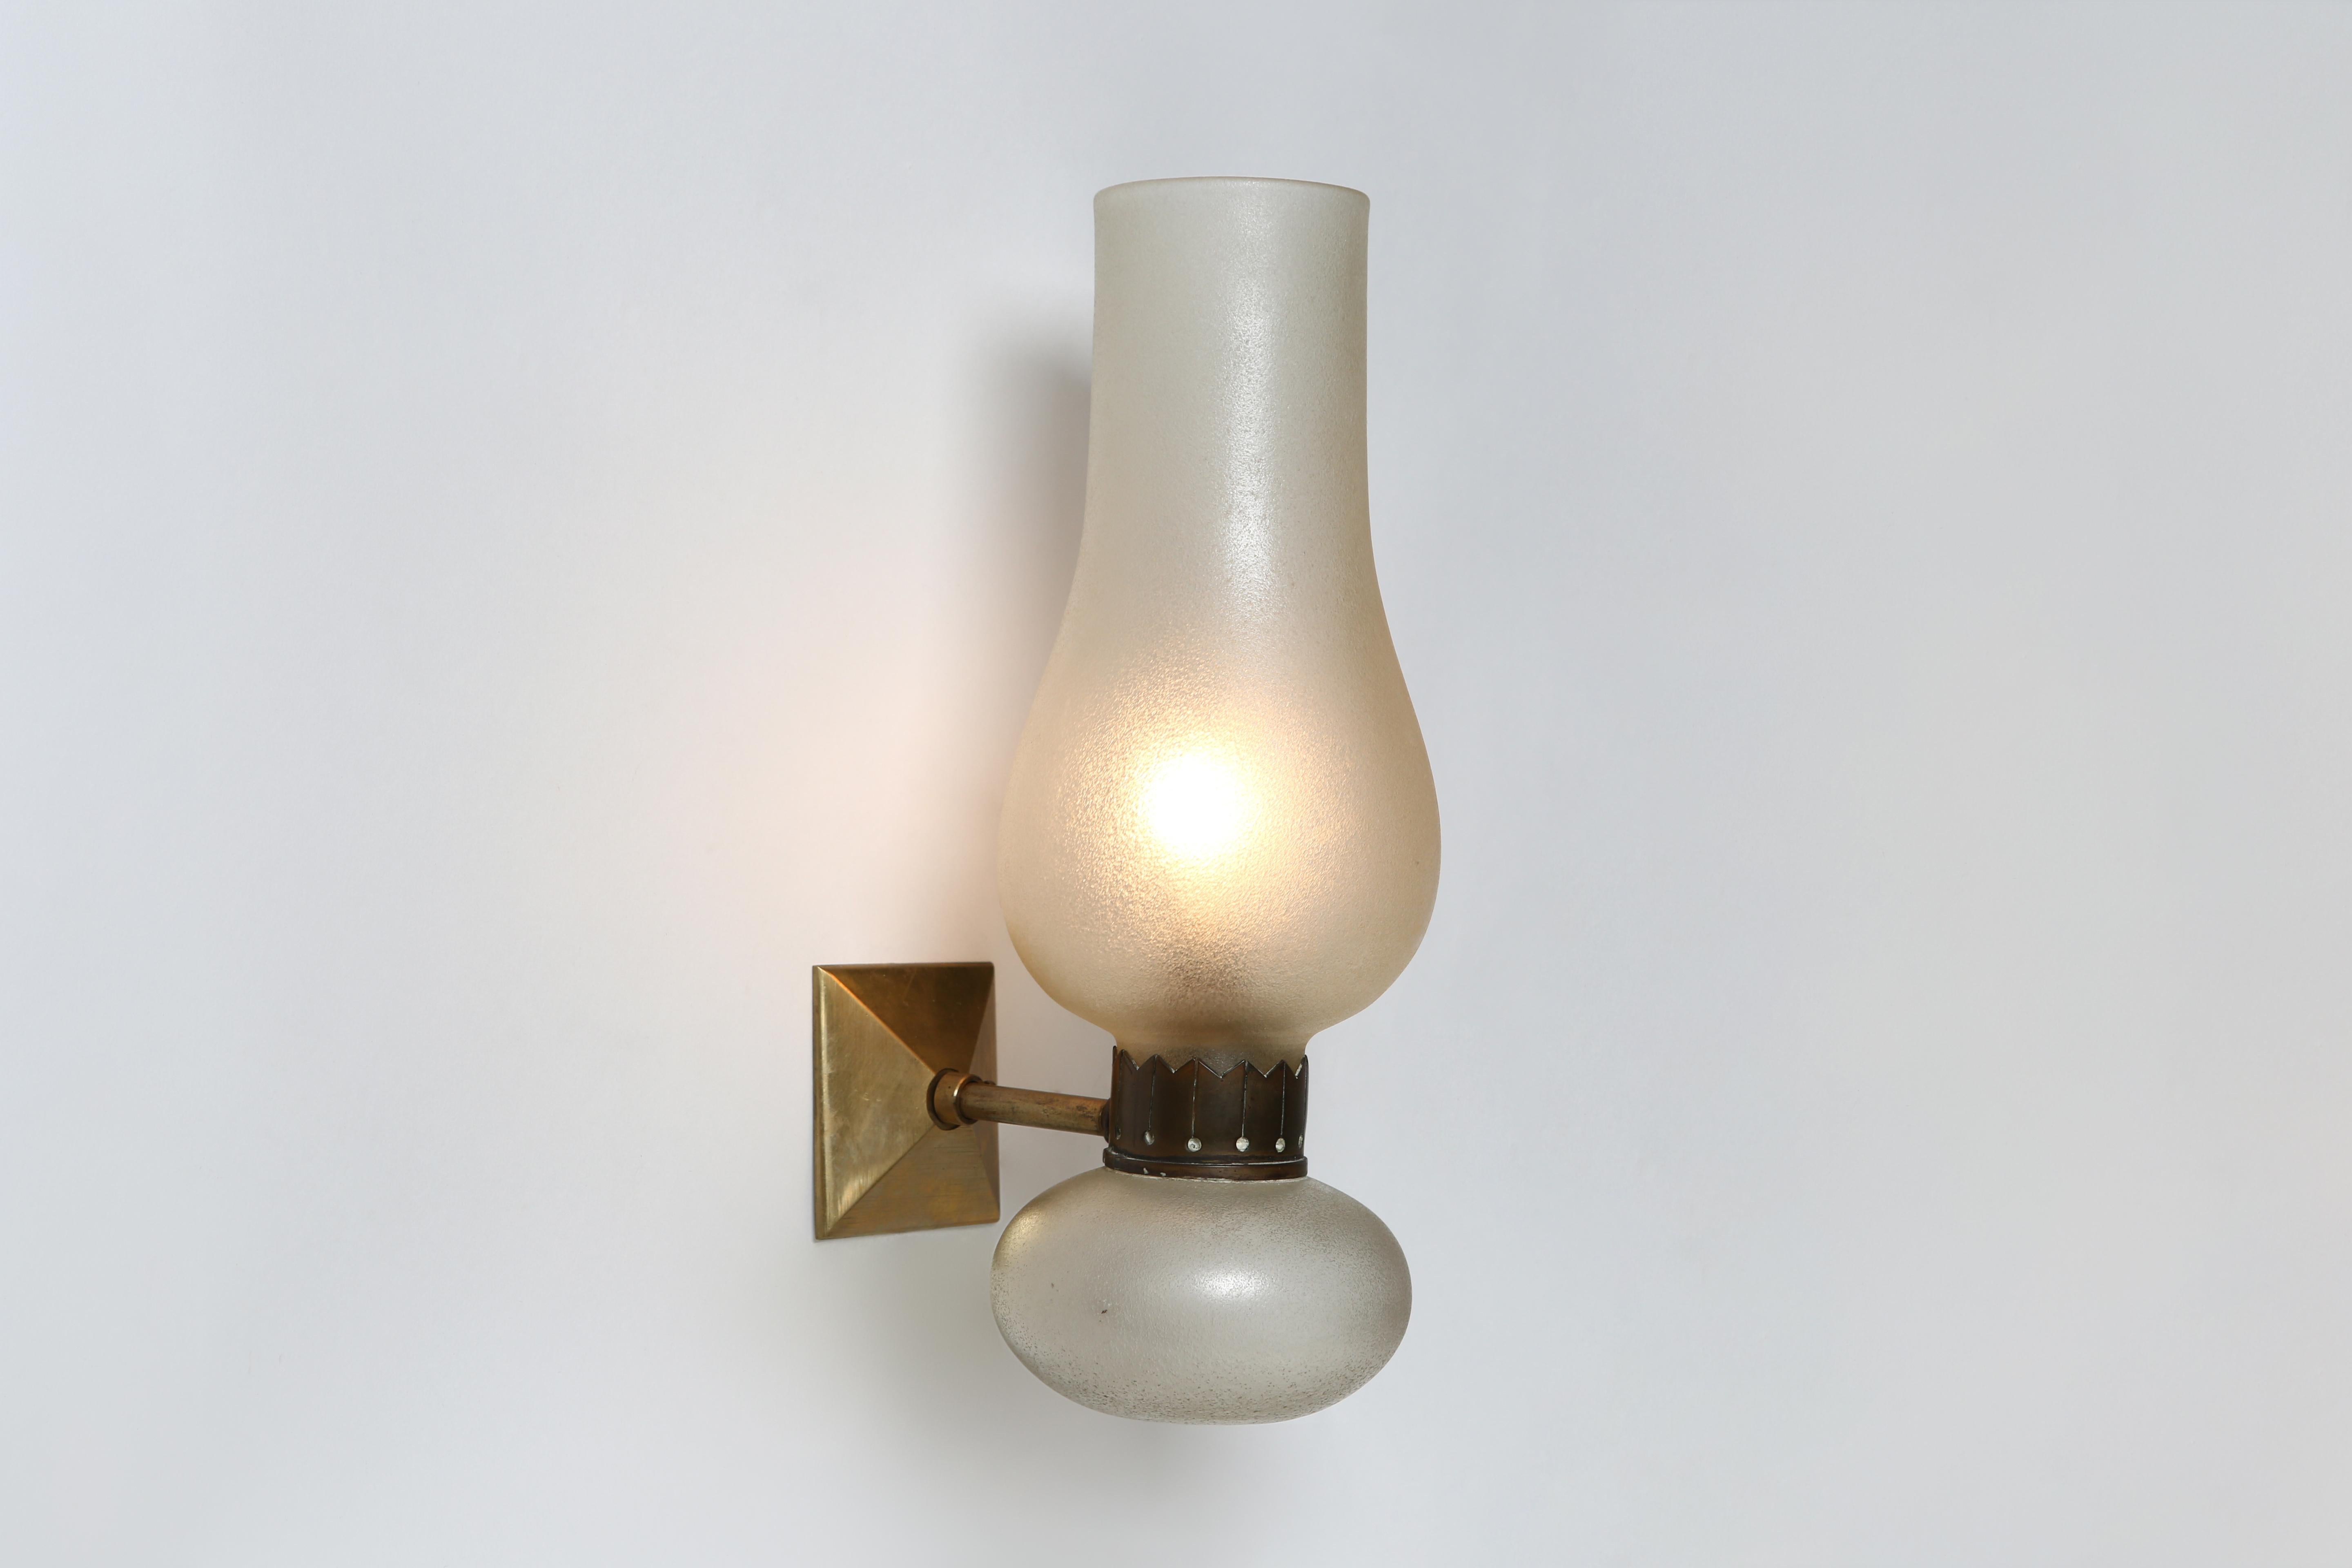 Murano sconce in corroso glass by Seguso
Made in Italy in 1940s
Takes 1 candelabra bulb.
Rewired for US with custom made brass back plate.

We take pride in bringing vintage fixtures to their full glory again.
At Illustris Lighting our main focus is